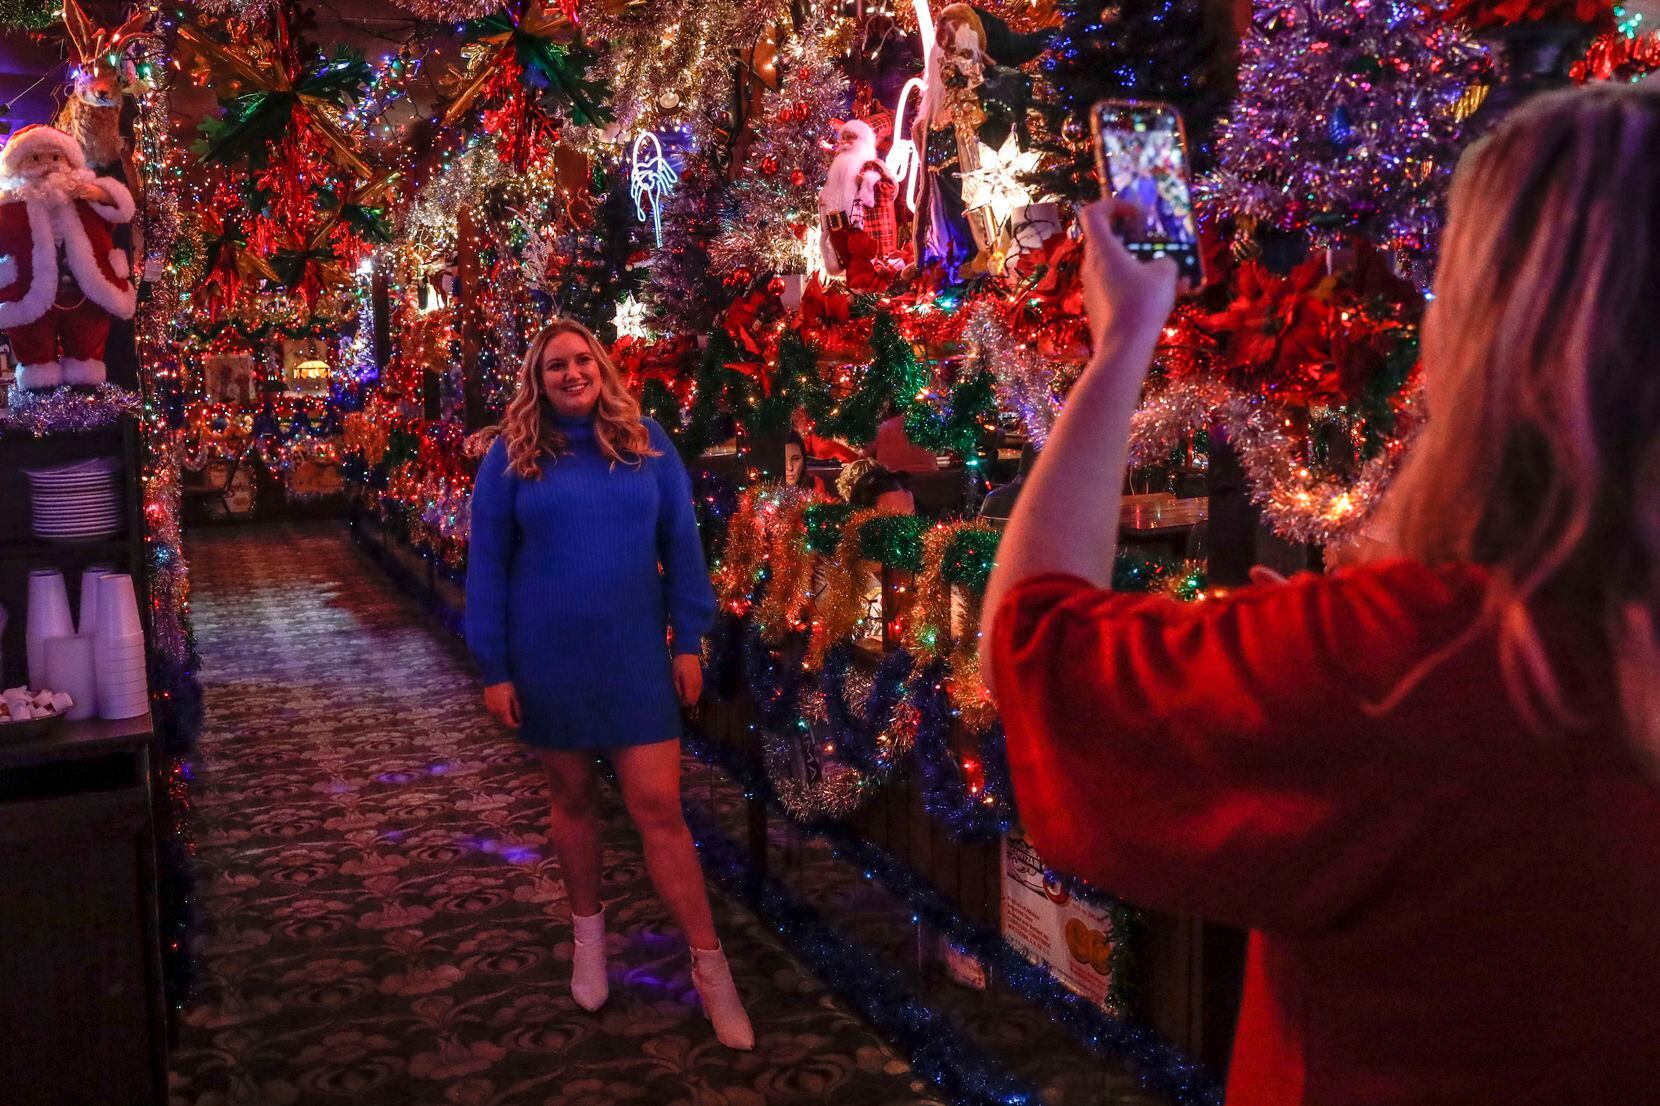 Elizabeth Brown has her photo taken by her sister, Nicole Brown, among Christmas parties...